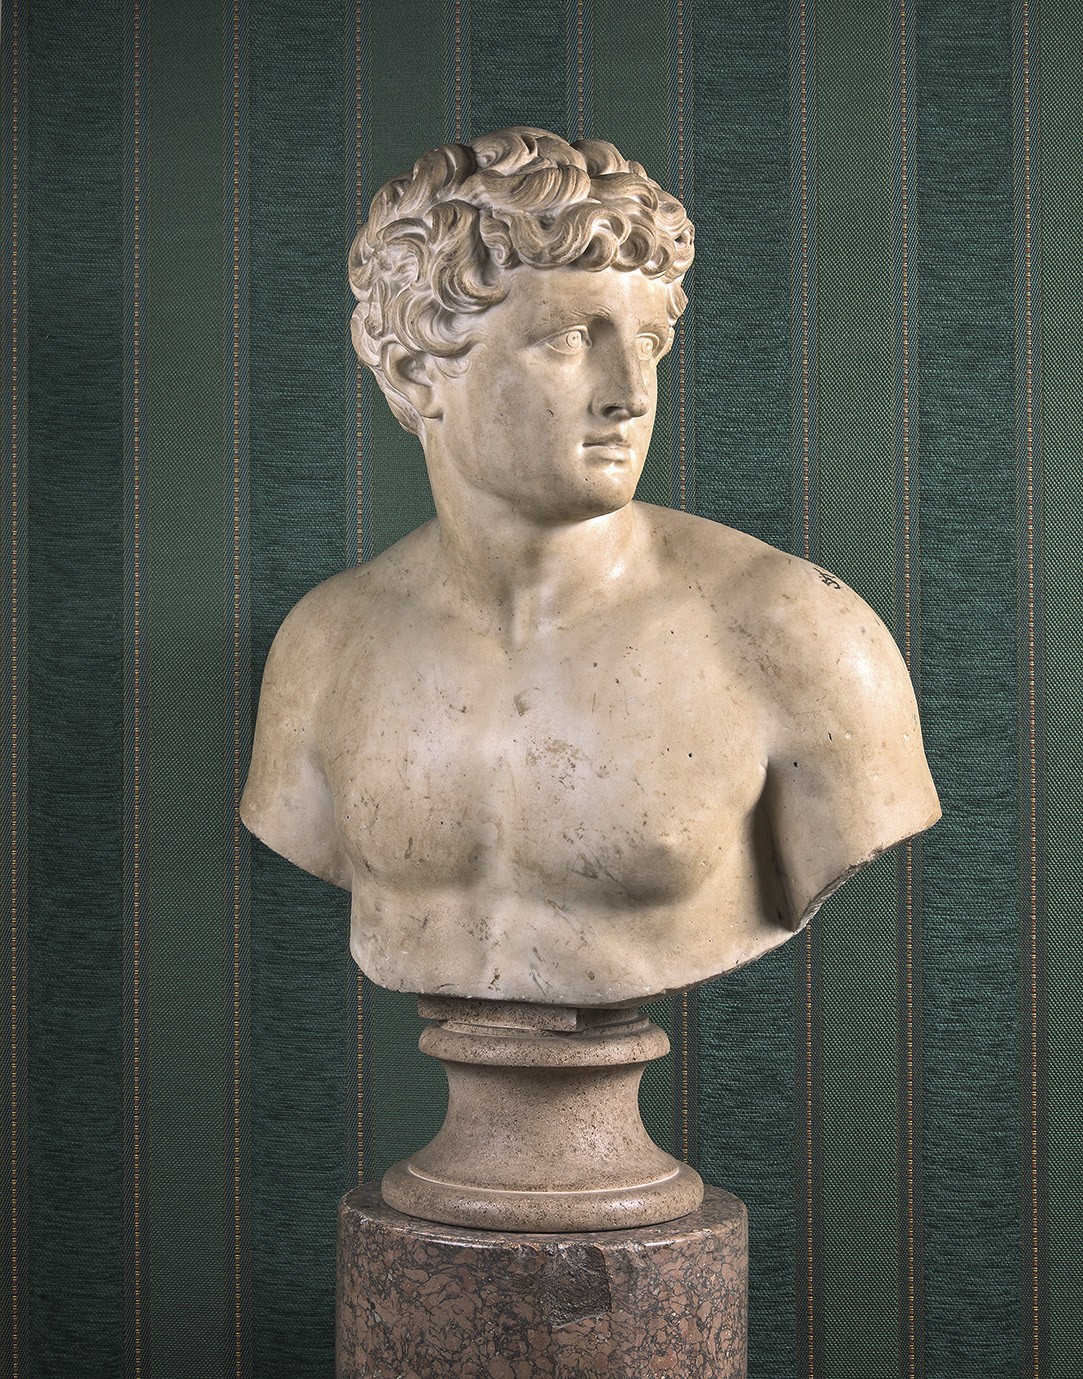 A white marble bust (h. 76 cm/29.92 in with pedestal) after an ancient model achieved the widest gap between its estimate, €3,000/4,000, a